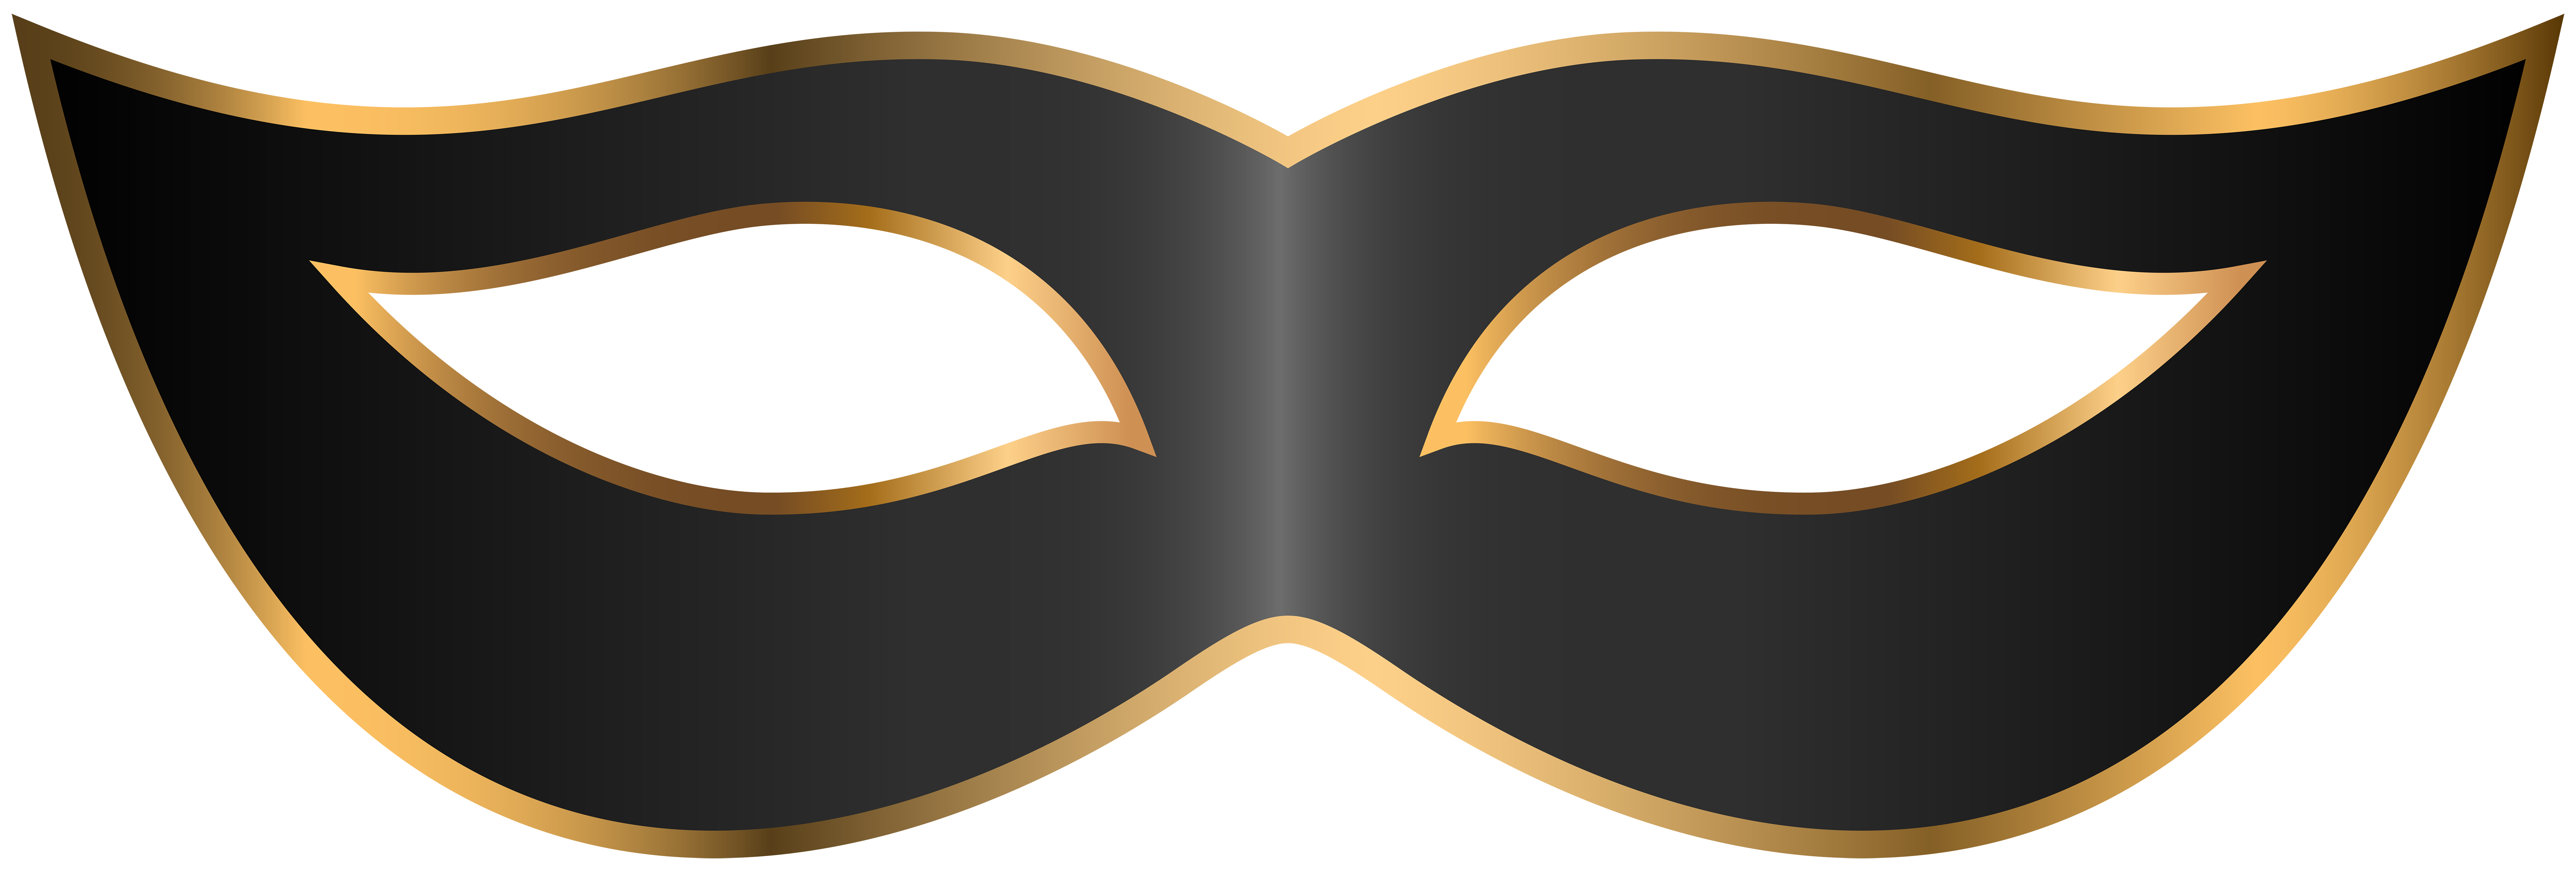 Mask Carnival White PNG HD Quality